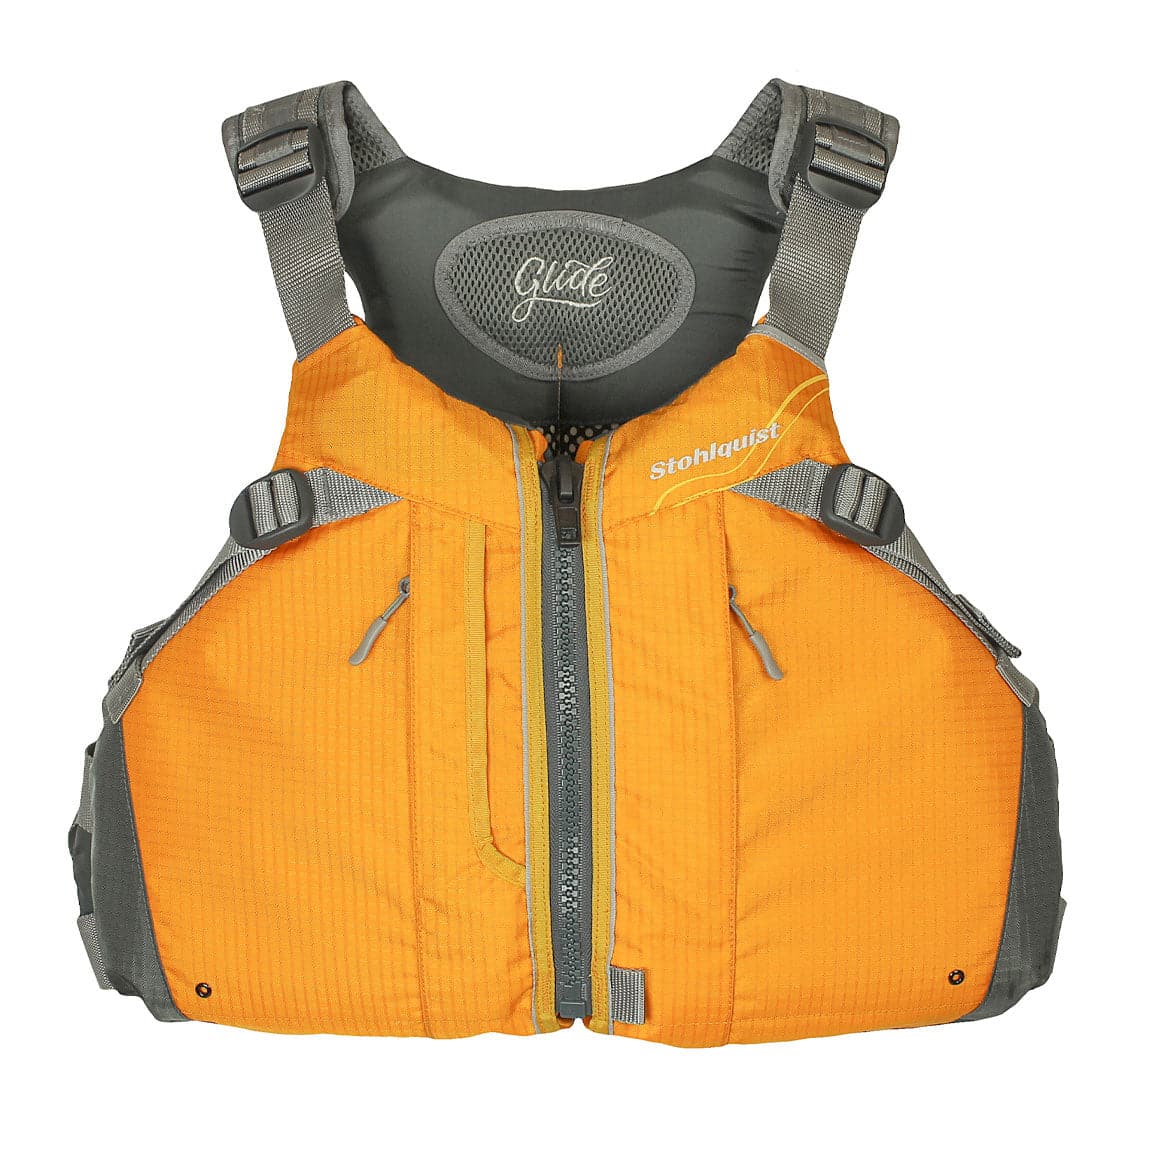 Featuring the Glide PFD women's pfd manufactured by Stohlquist shown here from a second angle.